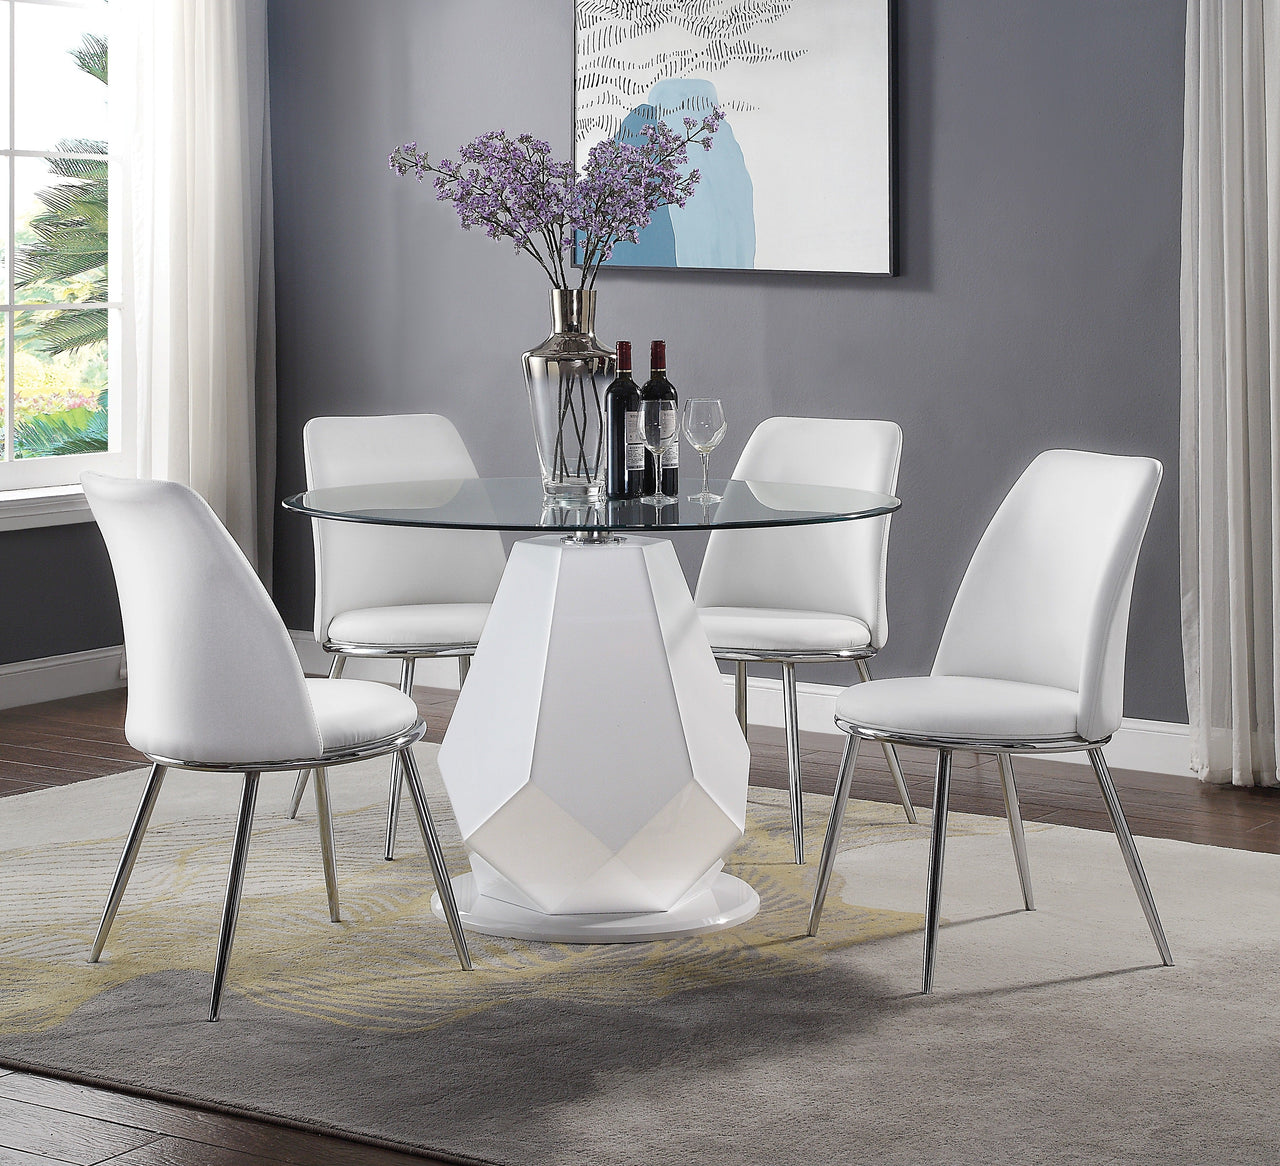 Chara White High Gloss & Clear Glass Top Dining Table image